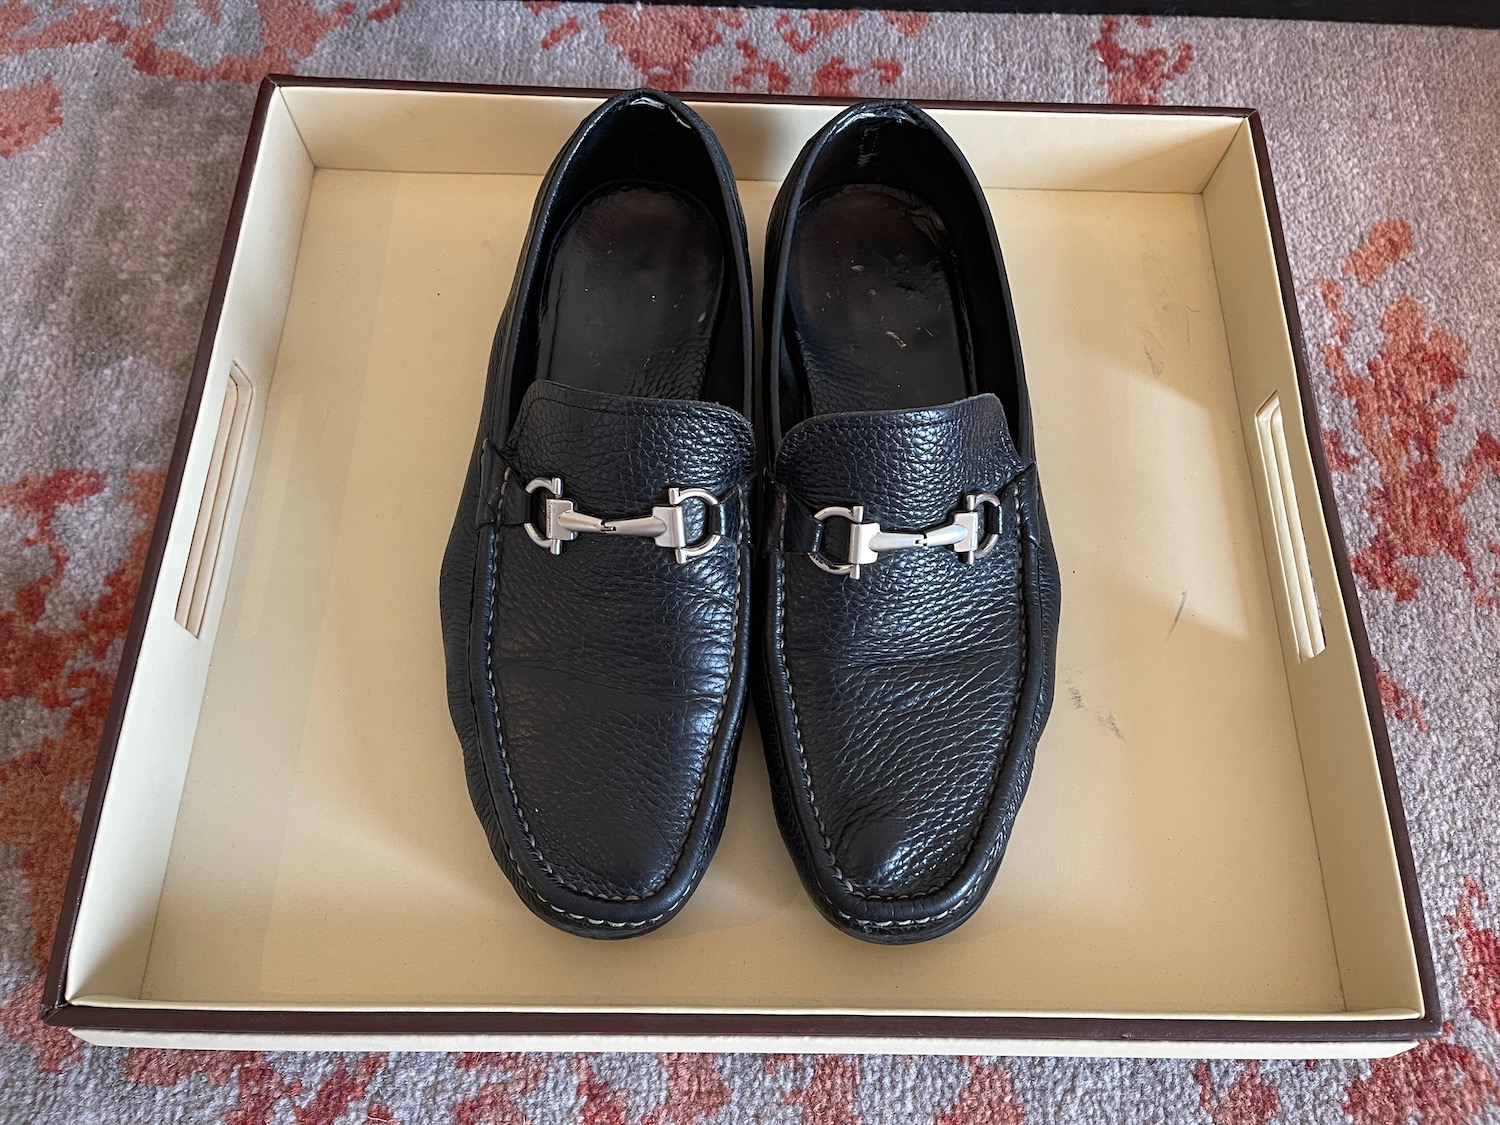 a pair of black shoes in a box